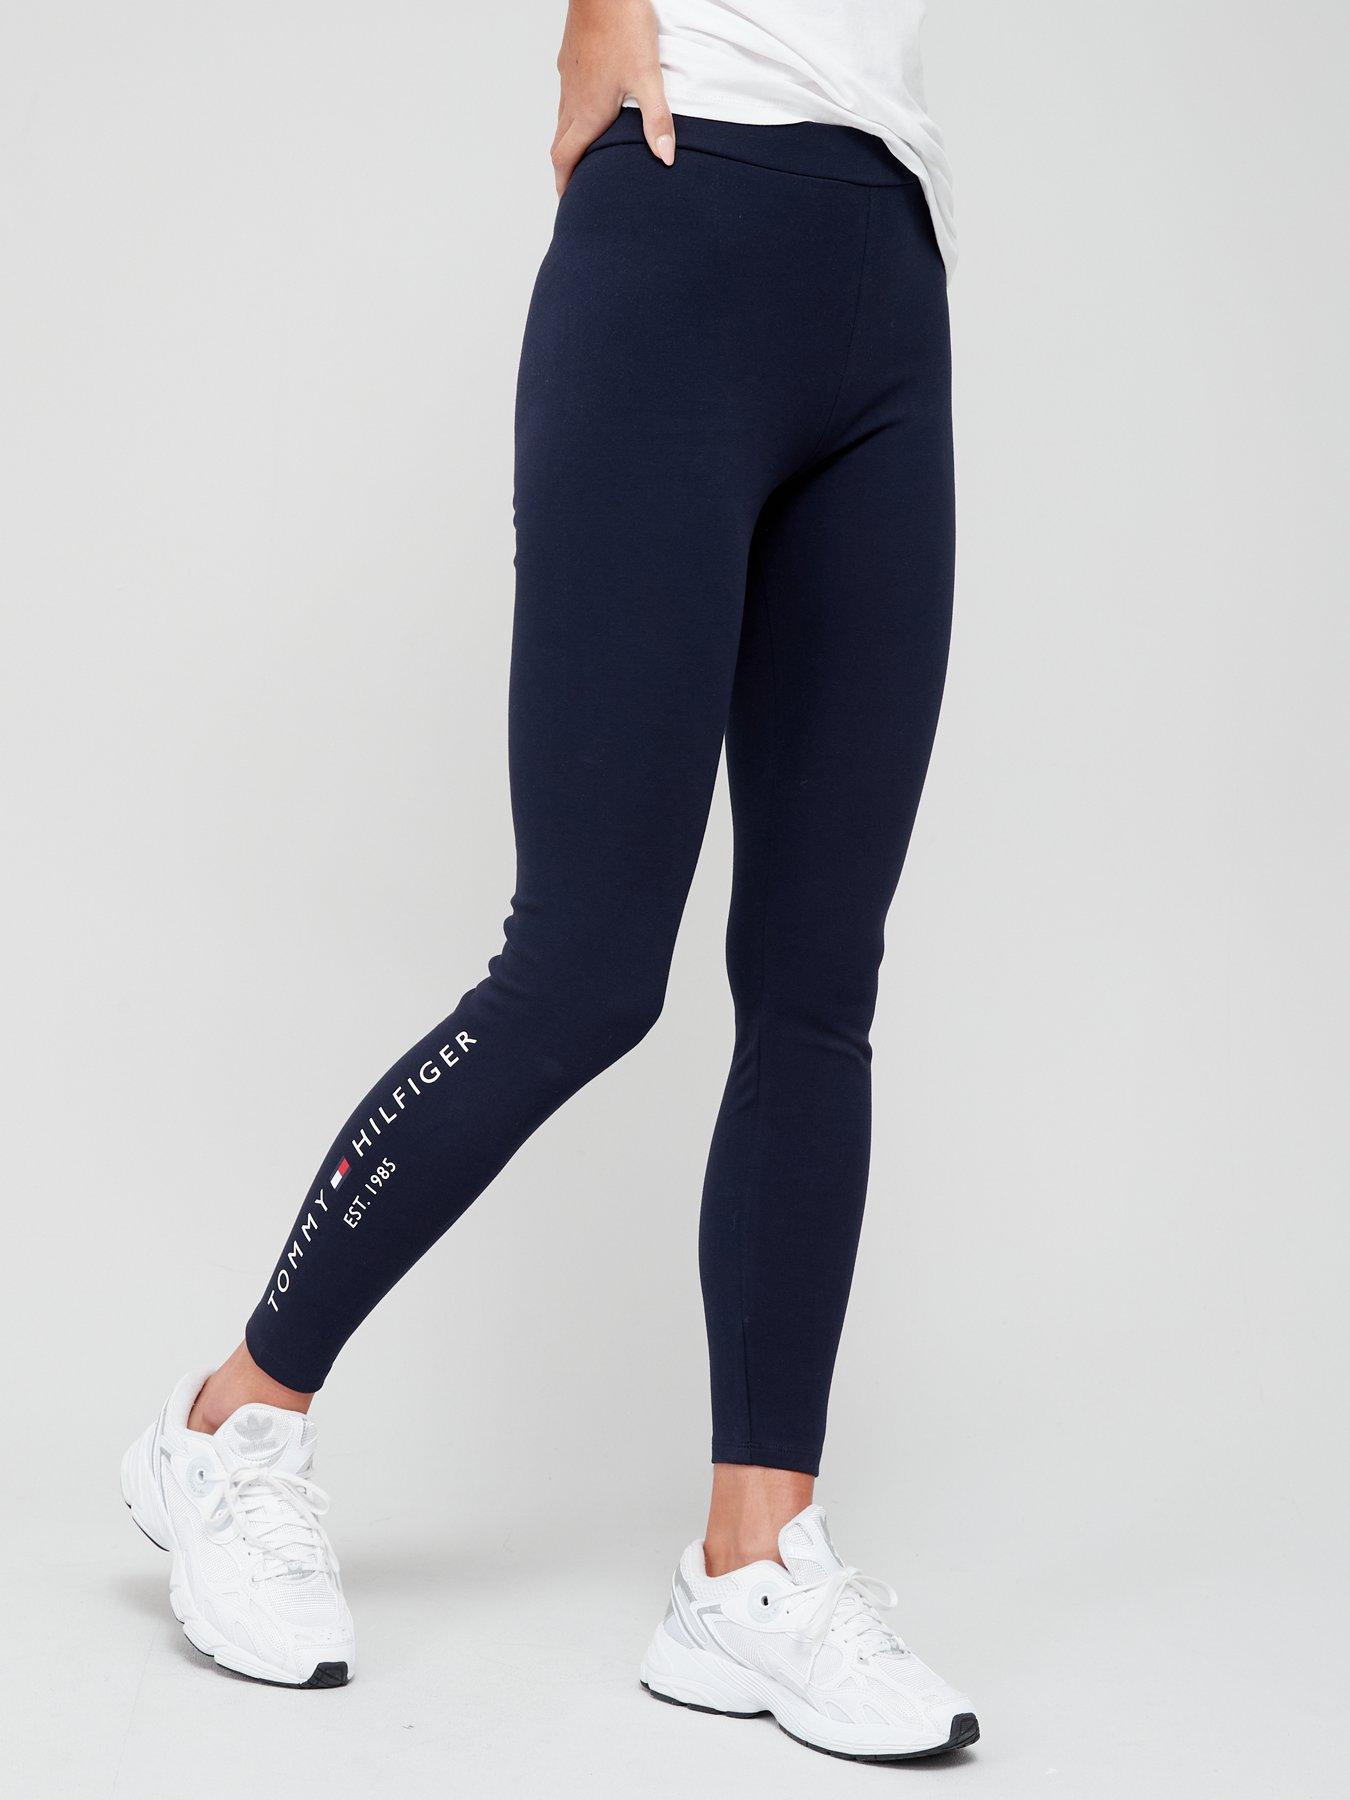 Buy TLC Sport, Gym Leggings wth Pockets with Tummy Control, Extra Strong  Compression, Buttery Soft Fabric